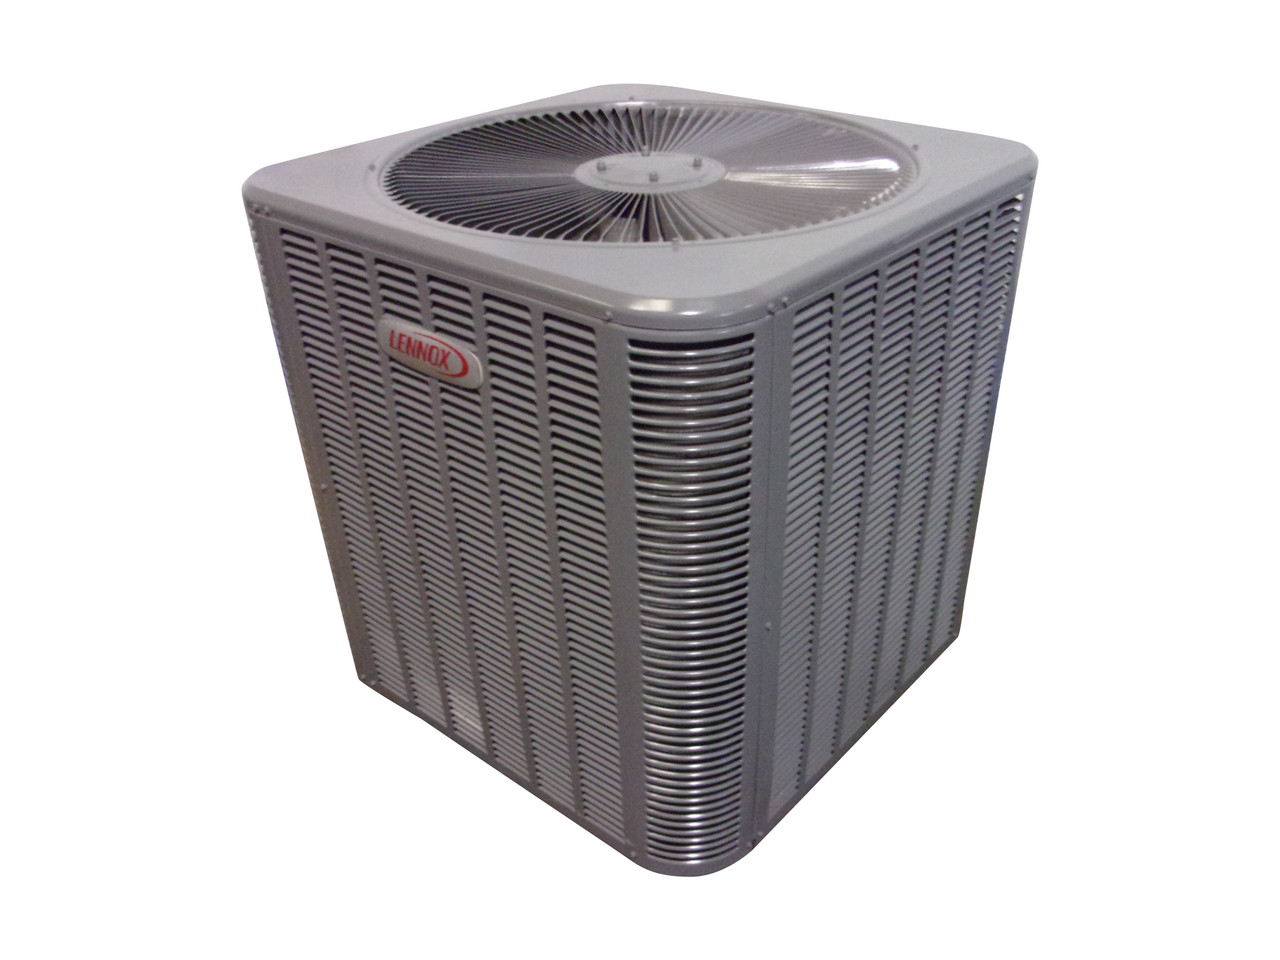 LENNOX Used Central Air Conditioner Condenser 14ACX